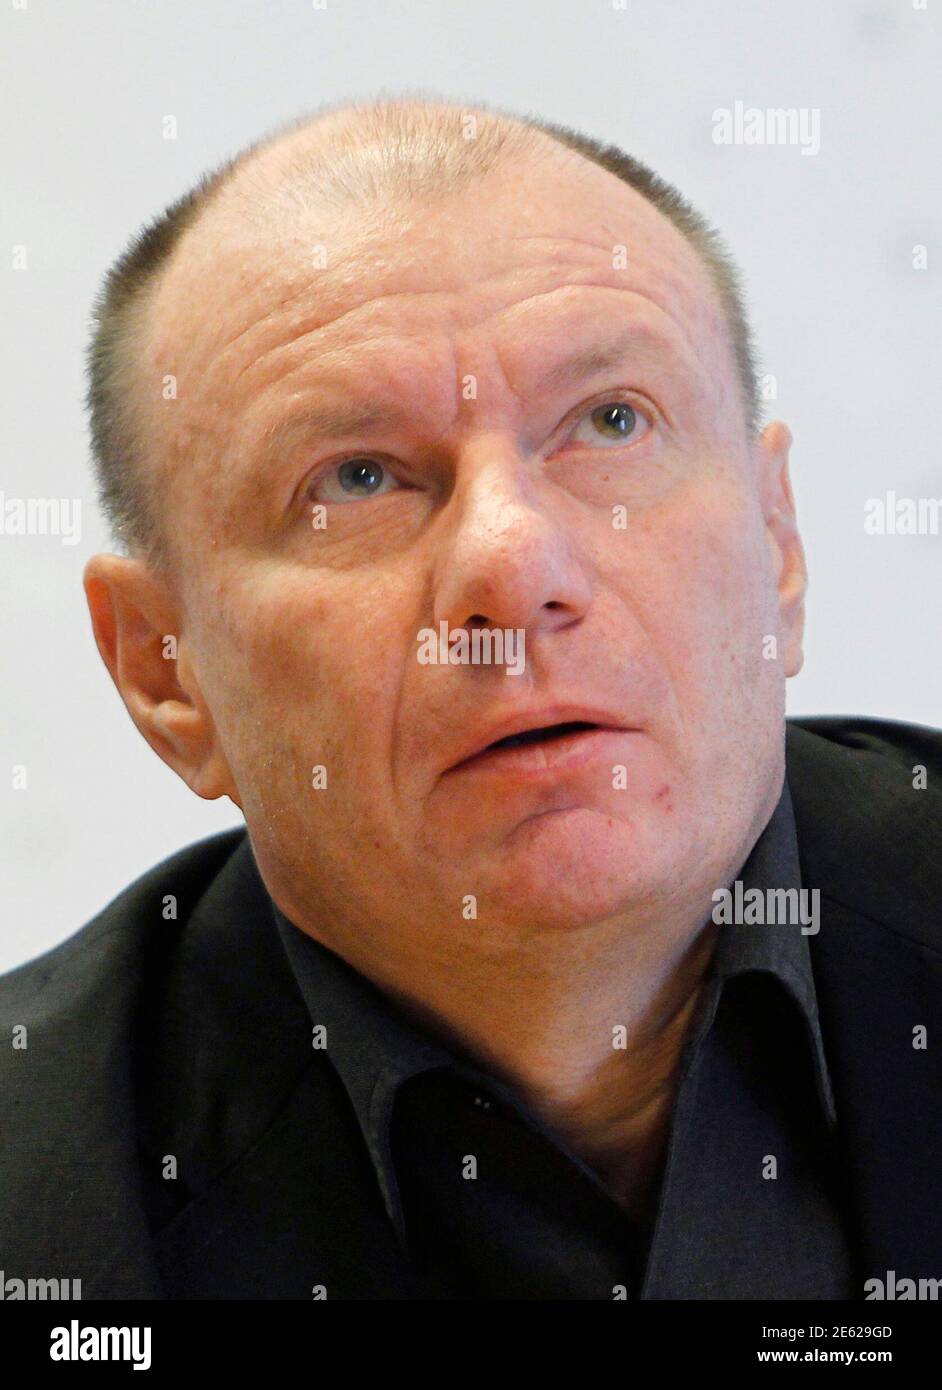 Interros Founder and Owner Vladimir Potanin attends the Reuters Russia Investment Summit in Moscow September 13, 2011. REUTERS/Denis Sinyakov (RUSSIA - Tags: HEADSHOT BUSINESS) Stock Photo